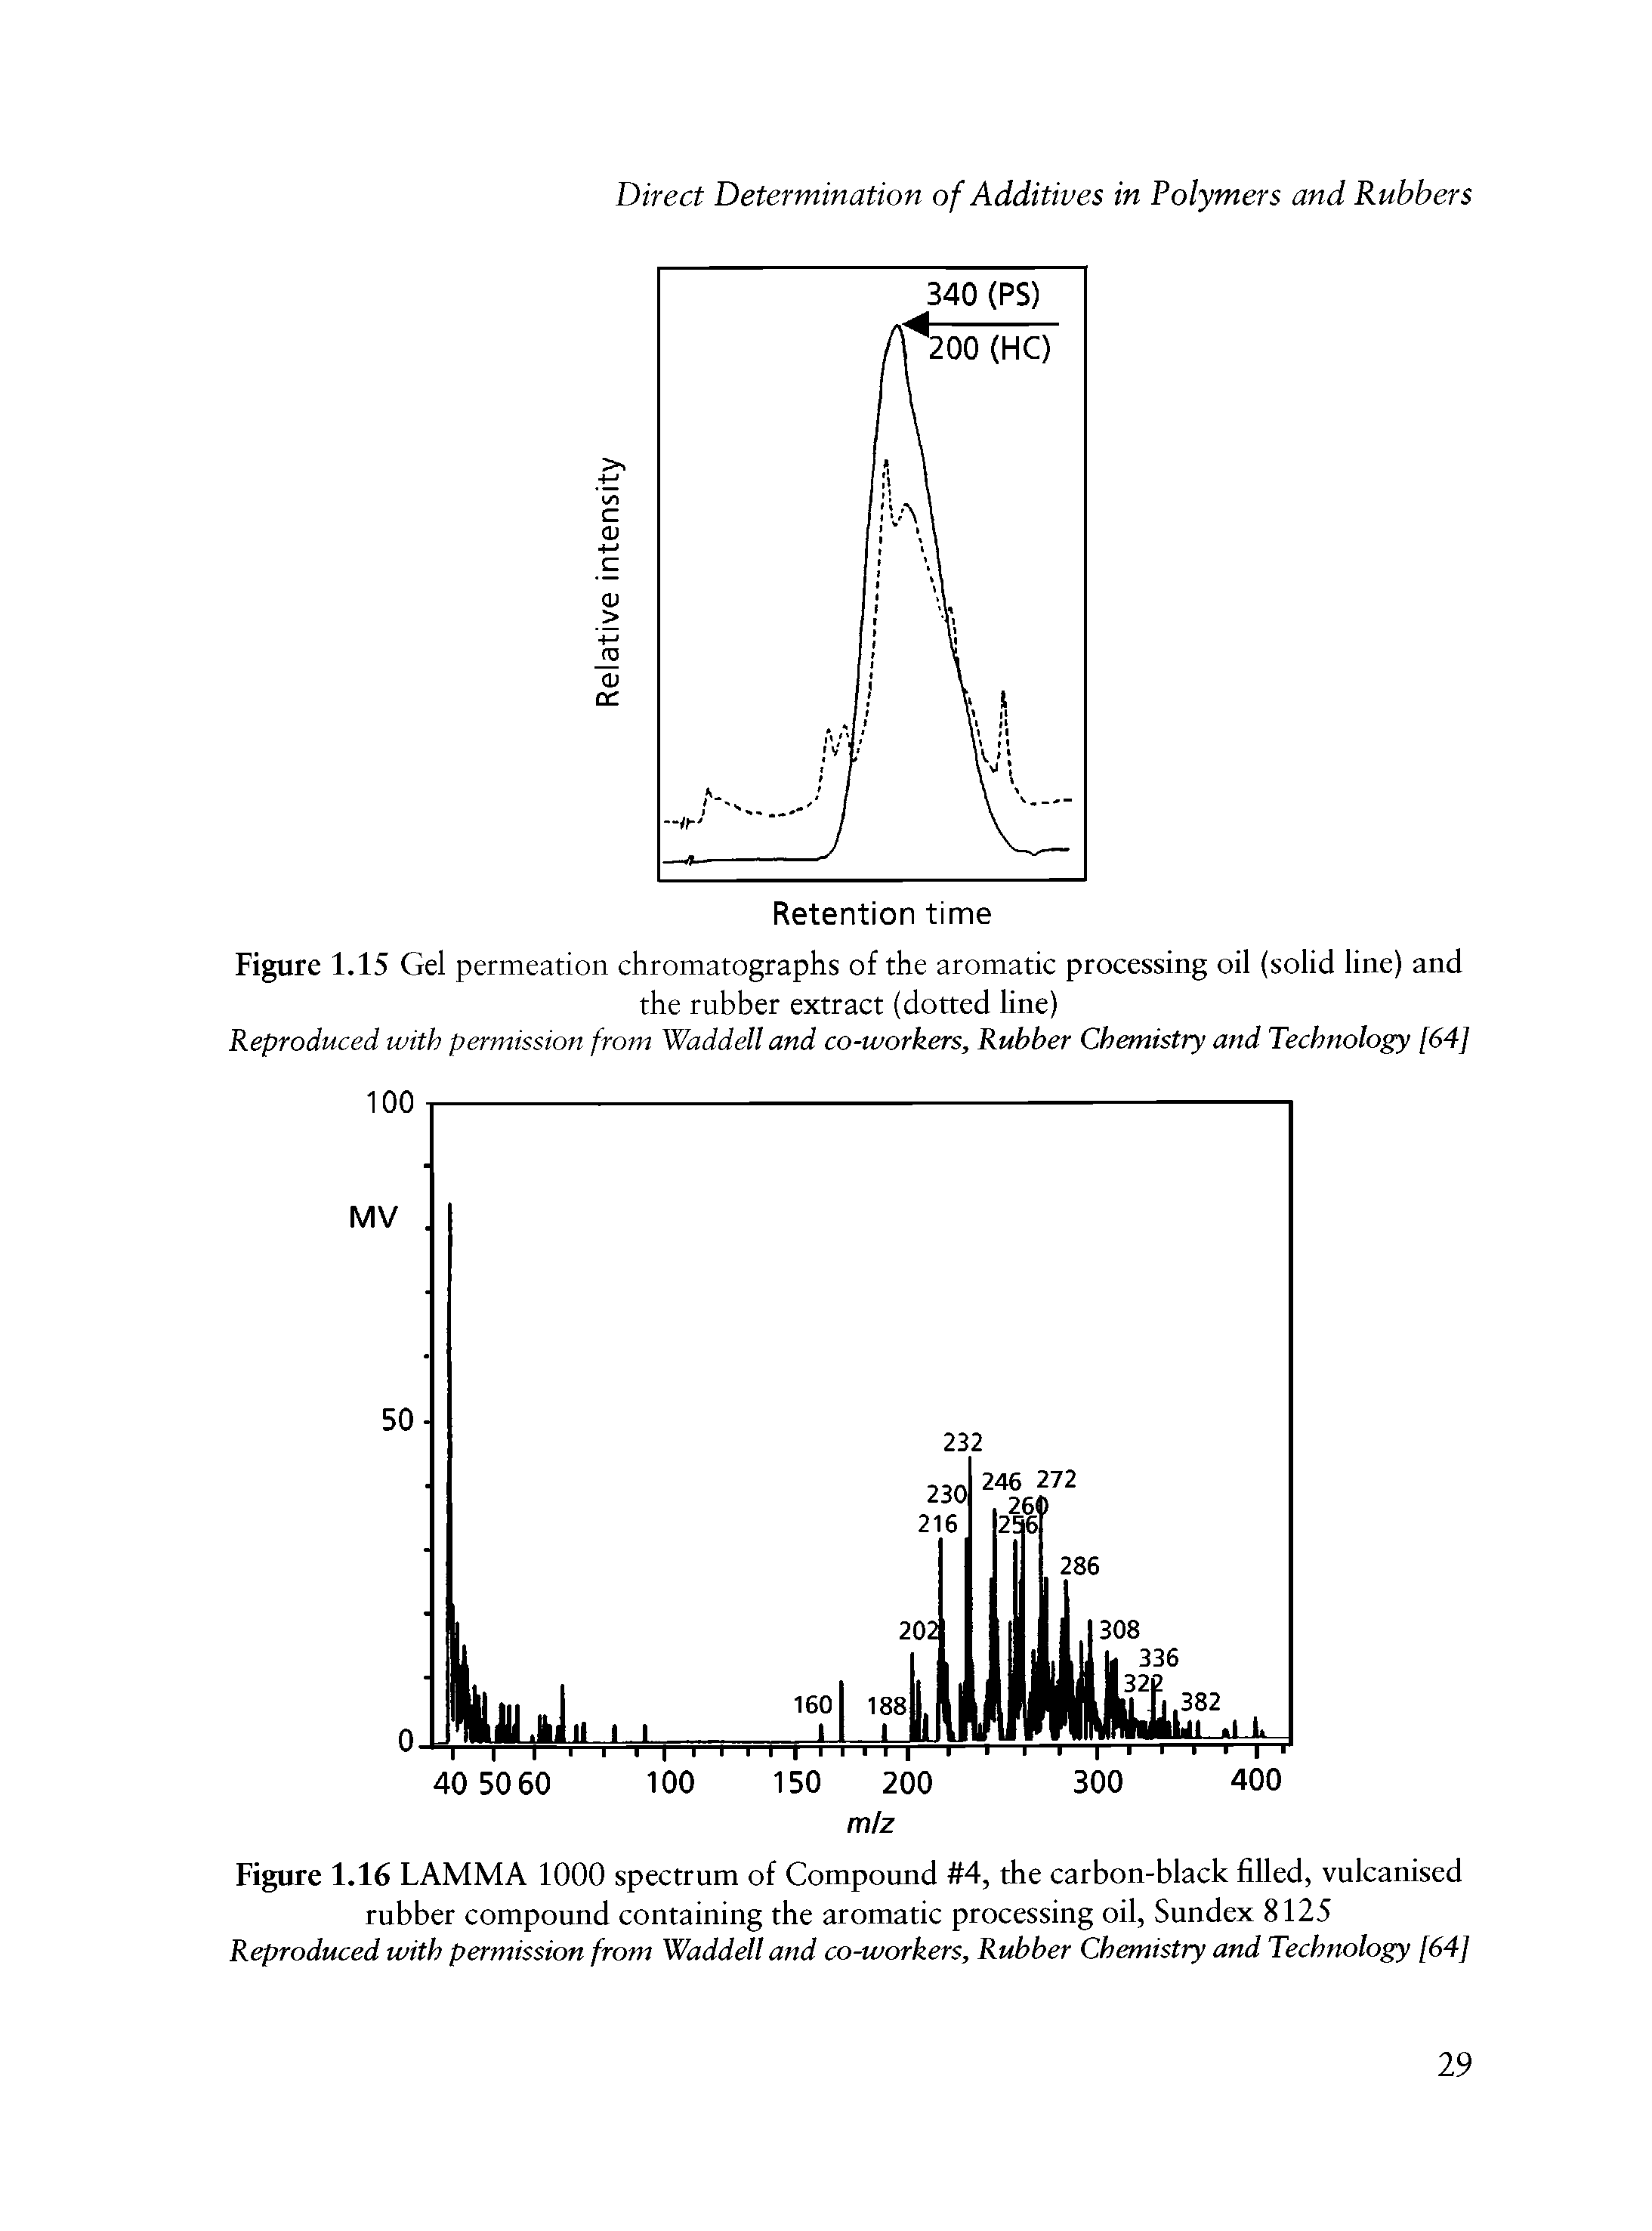 Figure 1.16 LAMMA 1000 spectrum of Compound 4, the carbon-black filled, vulcanised rubber compound containing the aromatic processing oil, Sundex 8125 Reproduced with permission from Waddell and co-workers. Rubber Chemistry and Technology [64]...